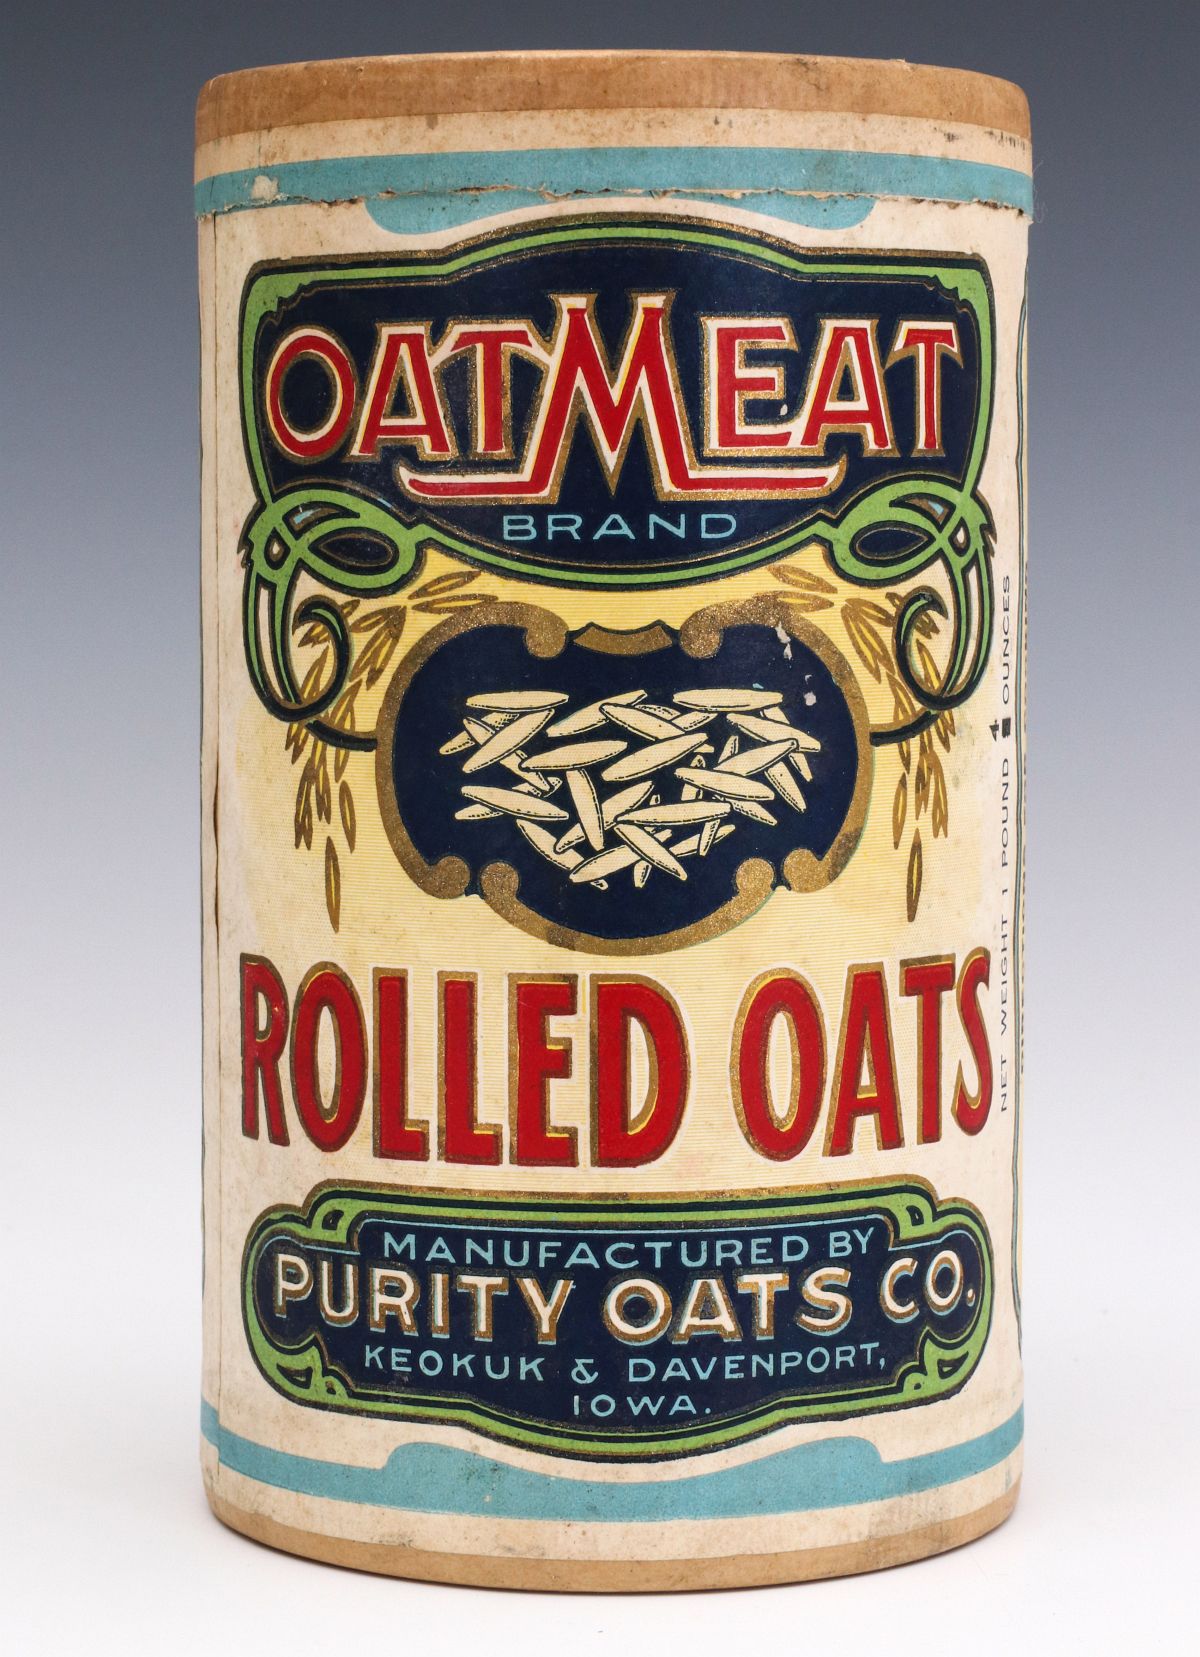 AN OATMEAT BRAND ROLLED OATS CONTAINER CIRCA 1930s